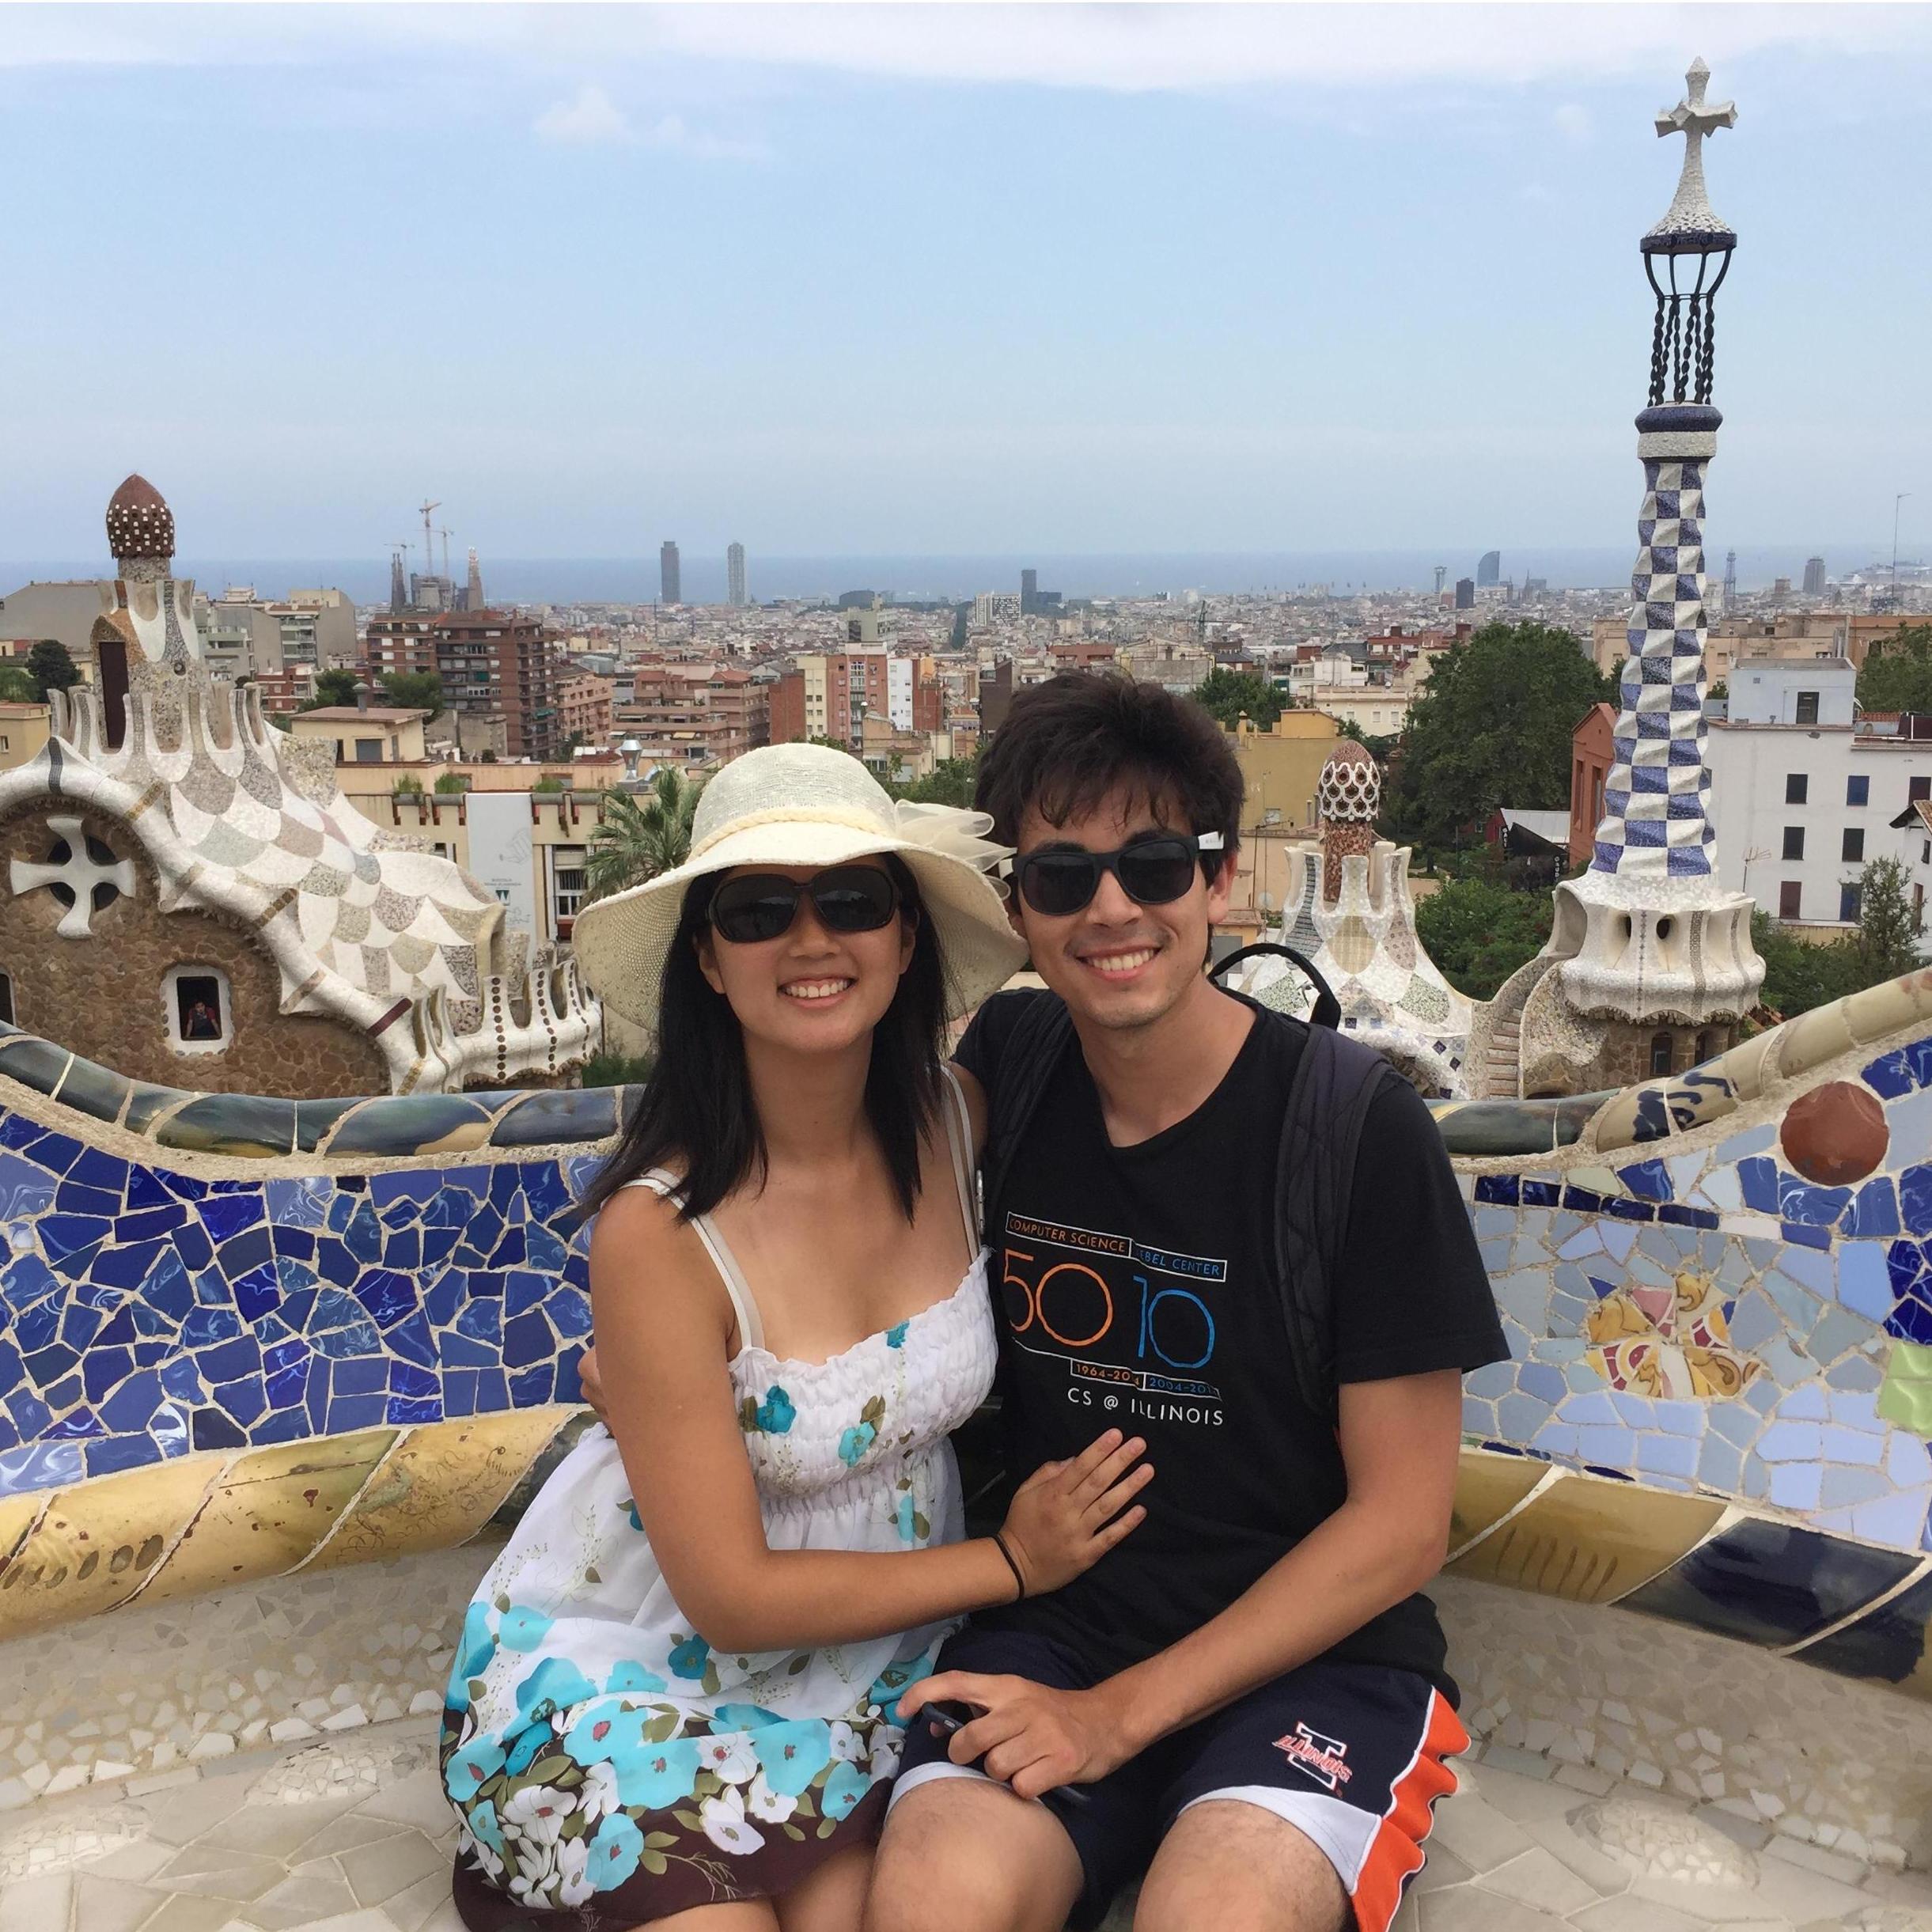 On top of the famous Park Guell in Barcelona (July 2017)